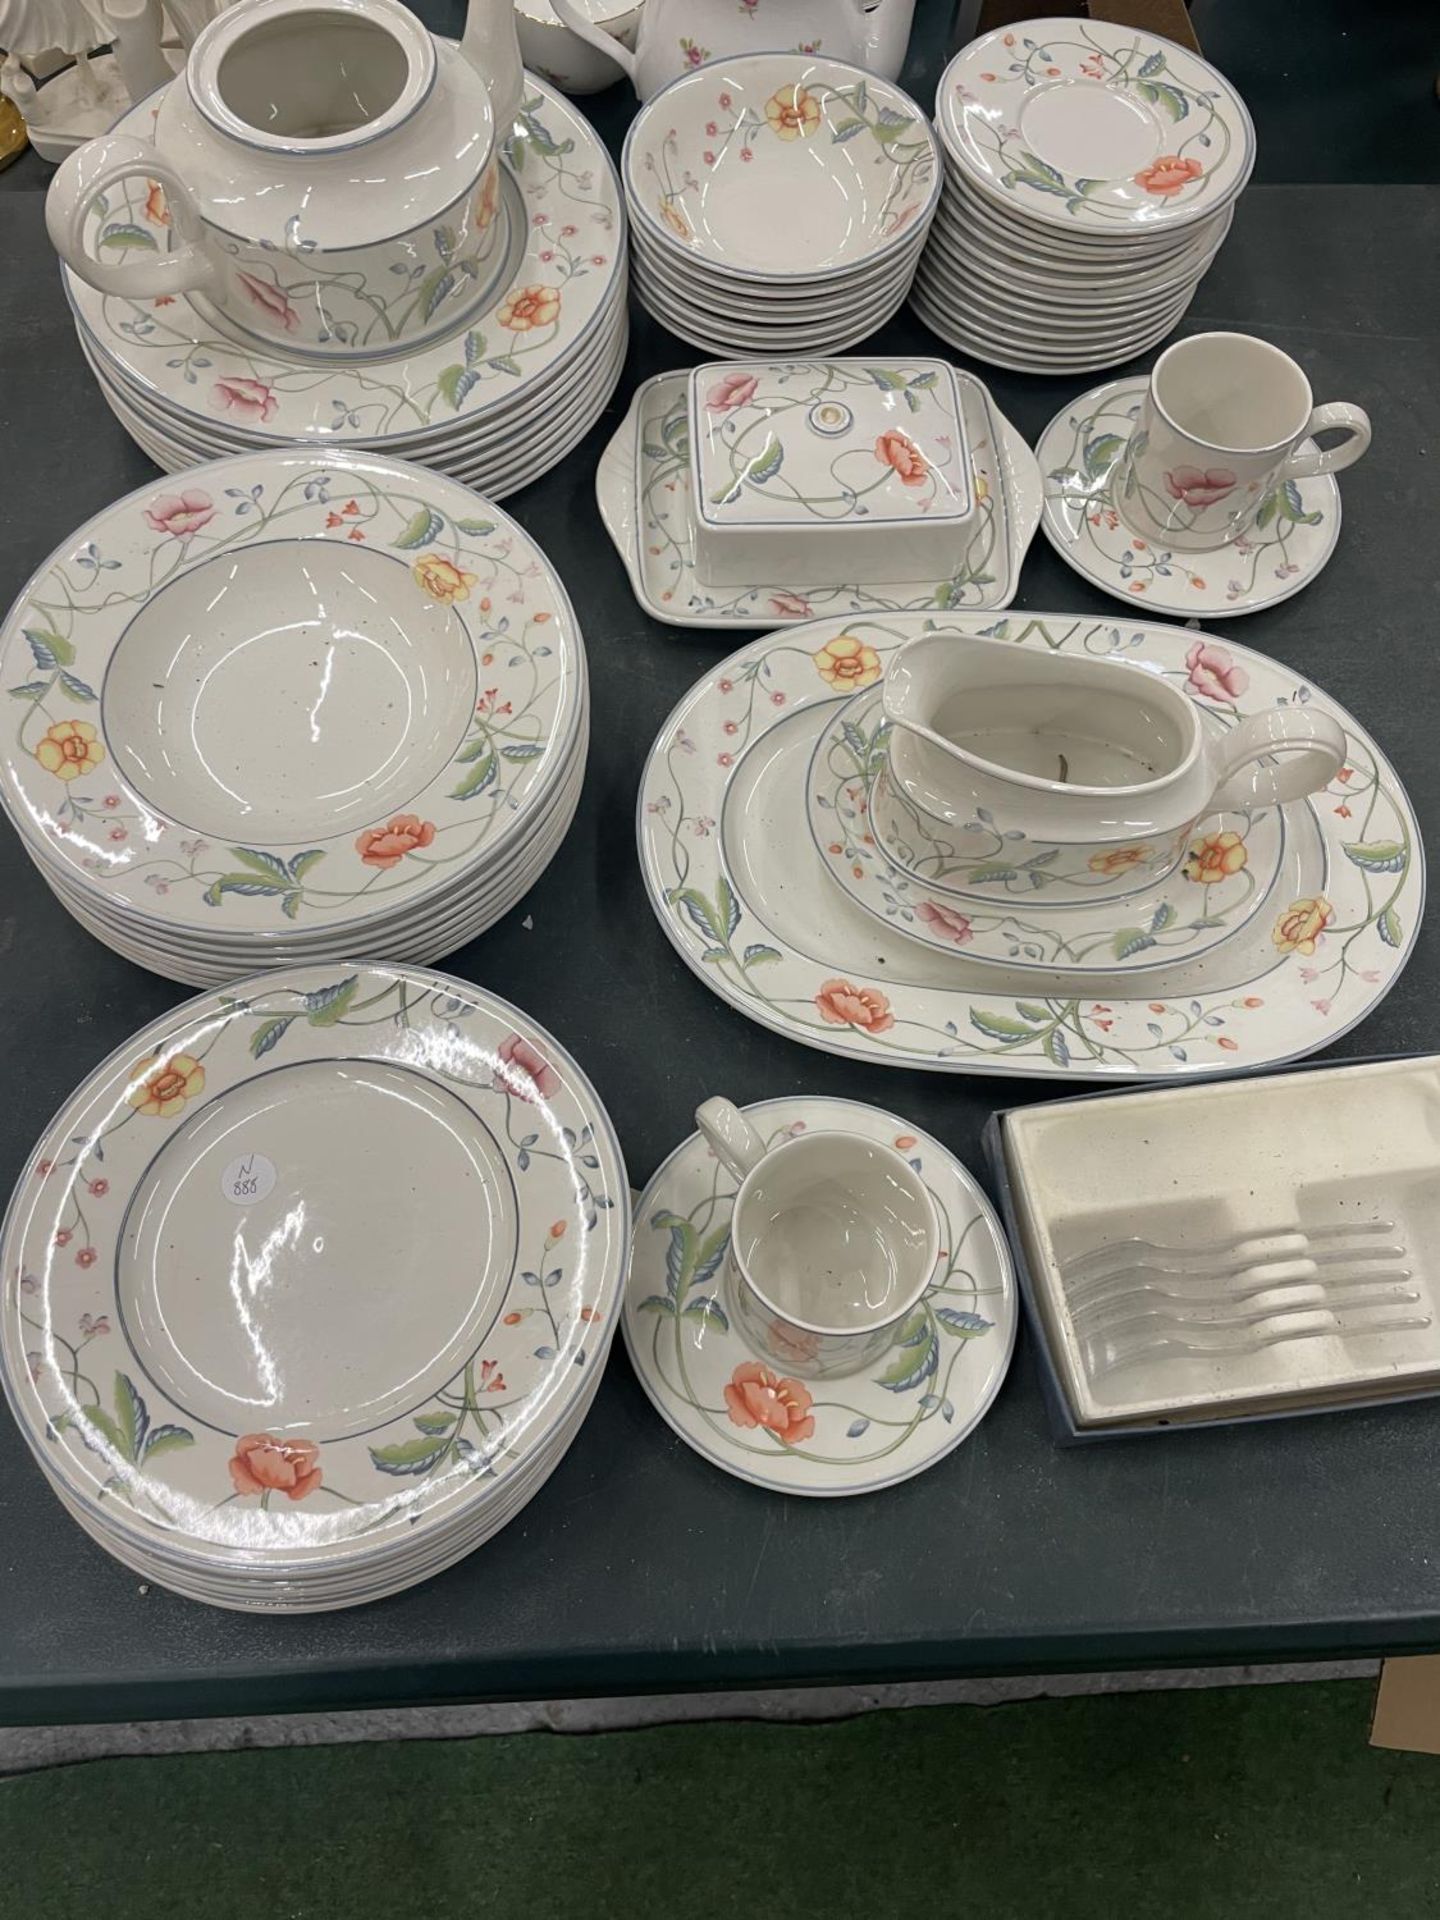 VARIOUS VILLEROY AND BOSH ALBERTINA DINNERWARE ITEMS TO INCLUDE BOWLS, PLATES, DISHES, FORKS,